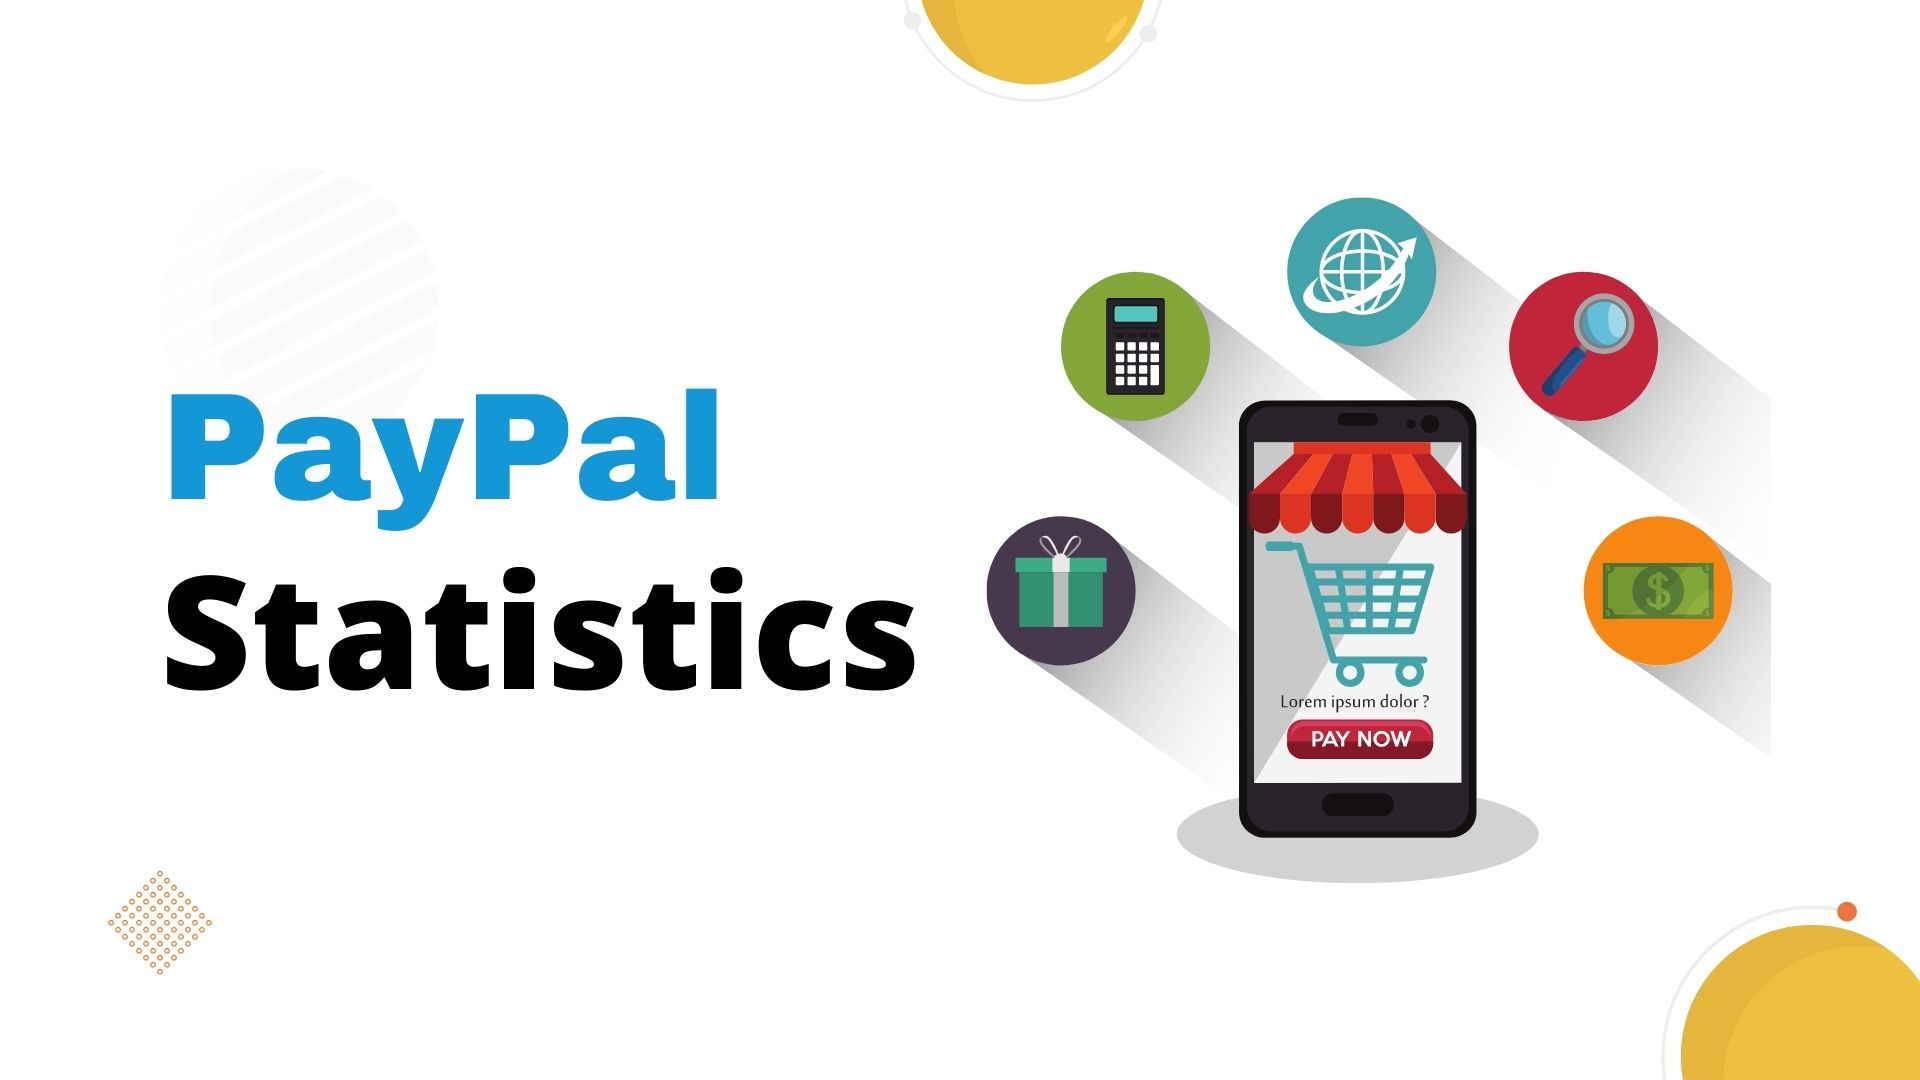 PayPal Statistics By Trends, Market Share, Demographics, Annual Revenue, Transaction and Business